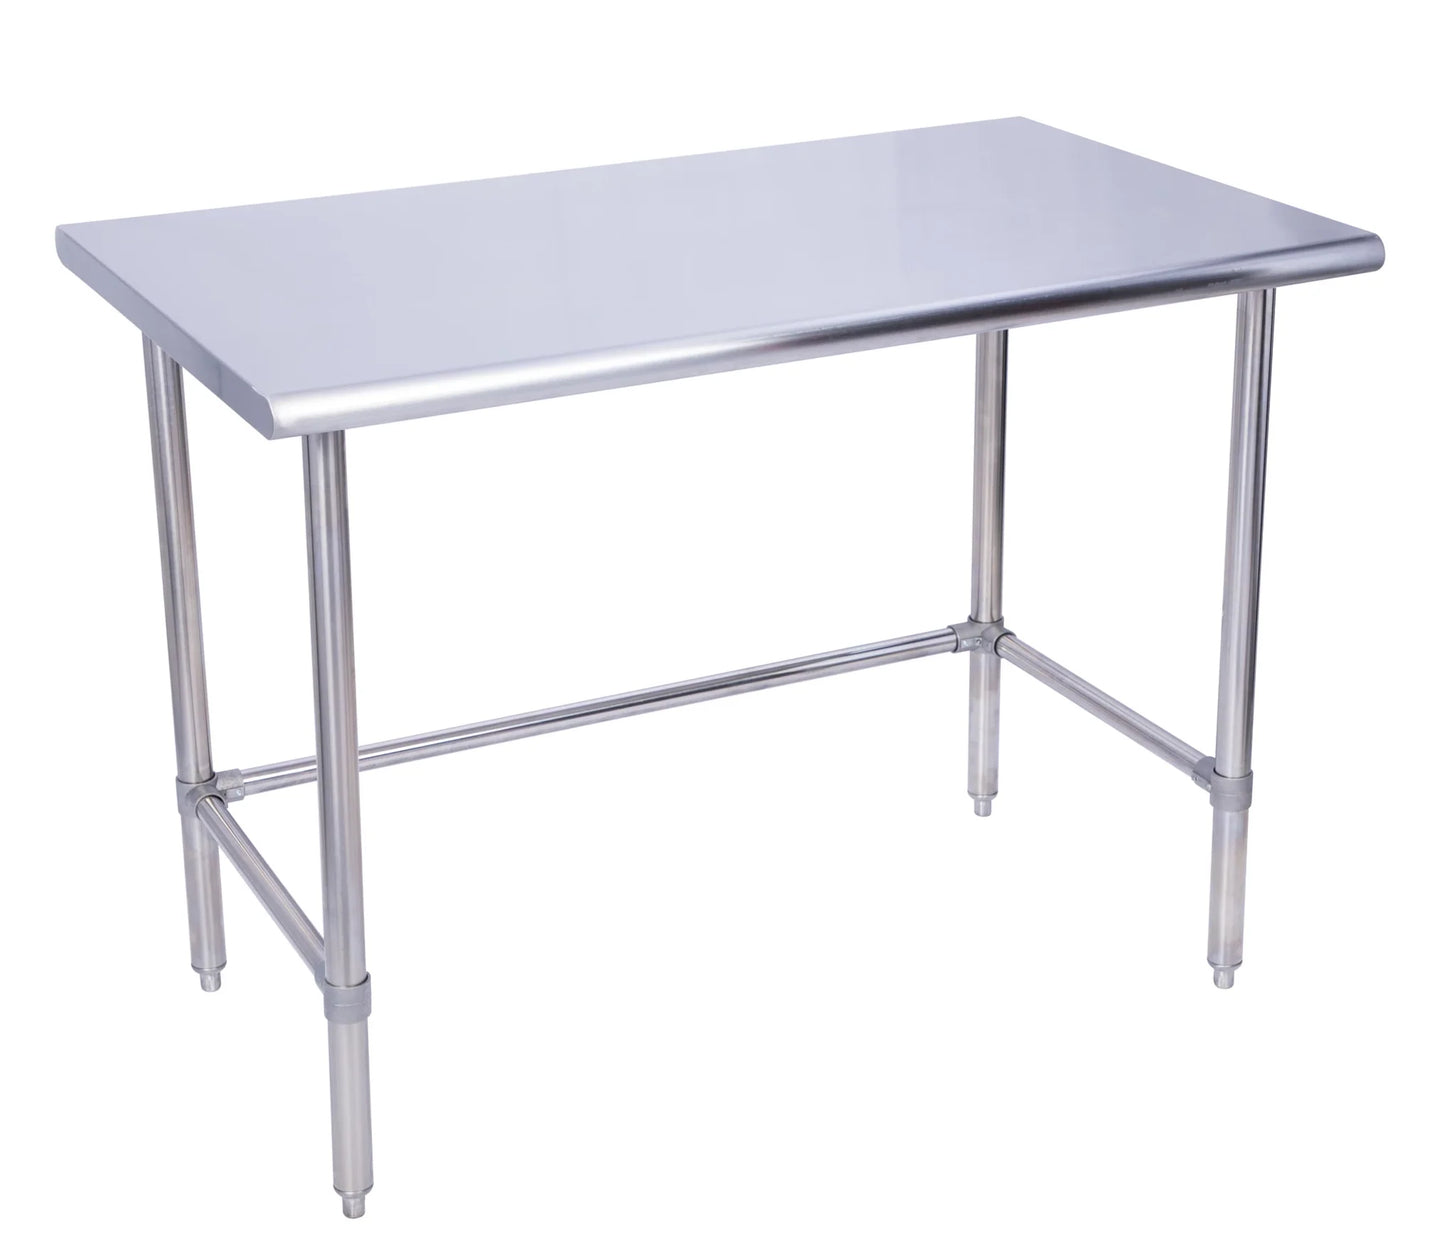 KCS WSCB-3024 30" x 24" Stainless Steel Work Table With Cross Bar